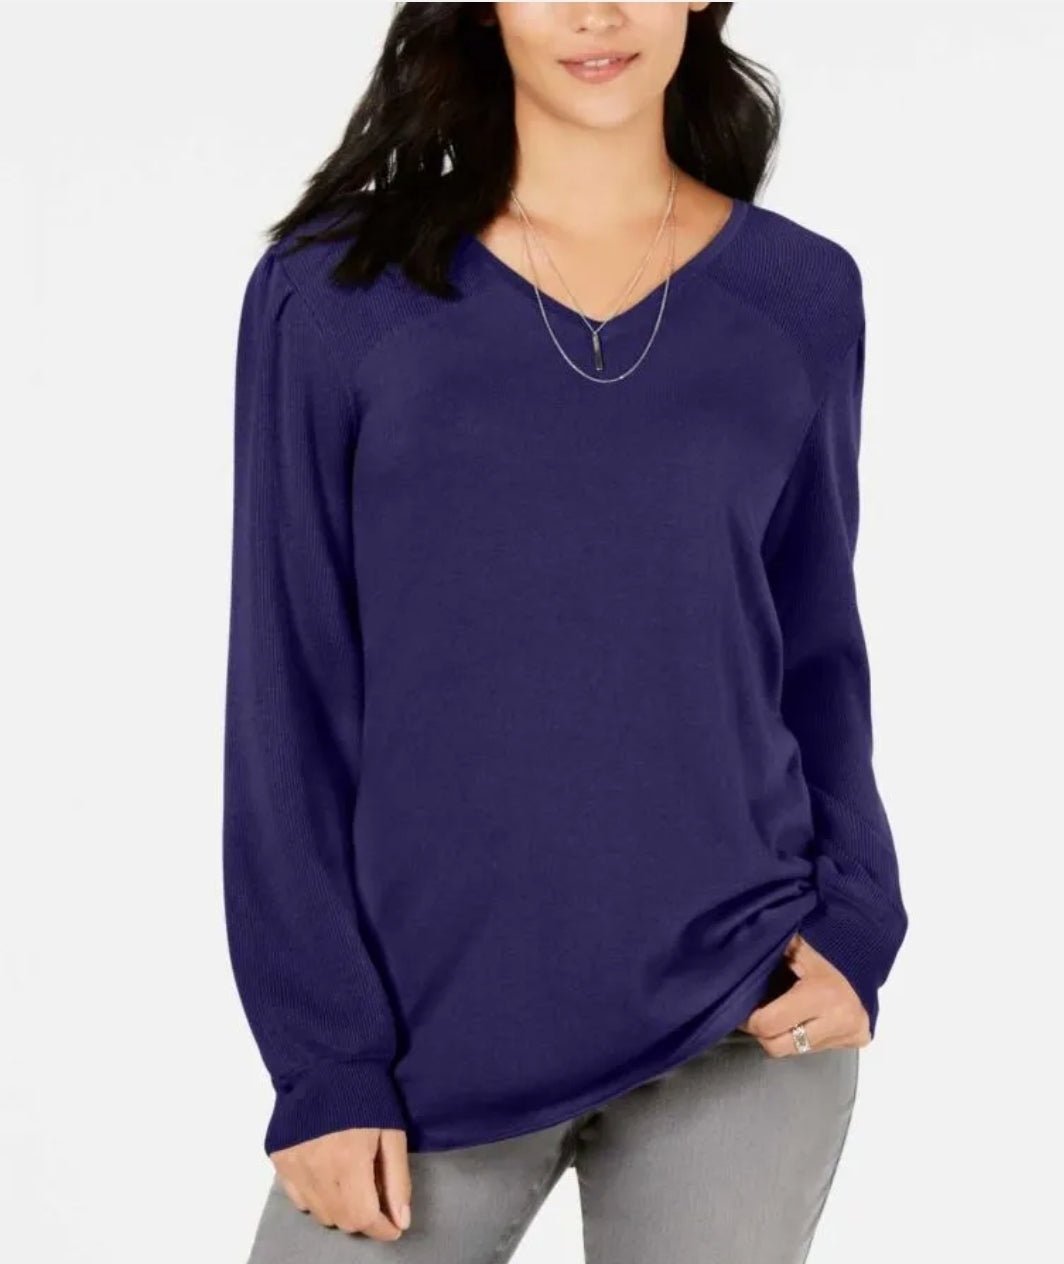 Style & Co Sweater Vneck Pleated Sleeve Tunic Purple M - BELLEZA'S - Style & Co Sweater Vneck Pleated Sleeve Tunic Purple M - BELLEZA'S - Sweater -